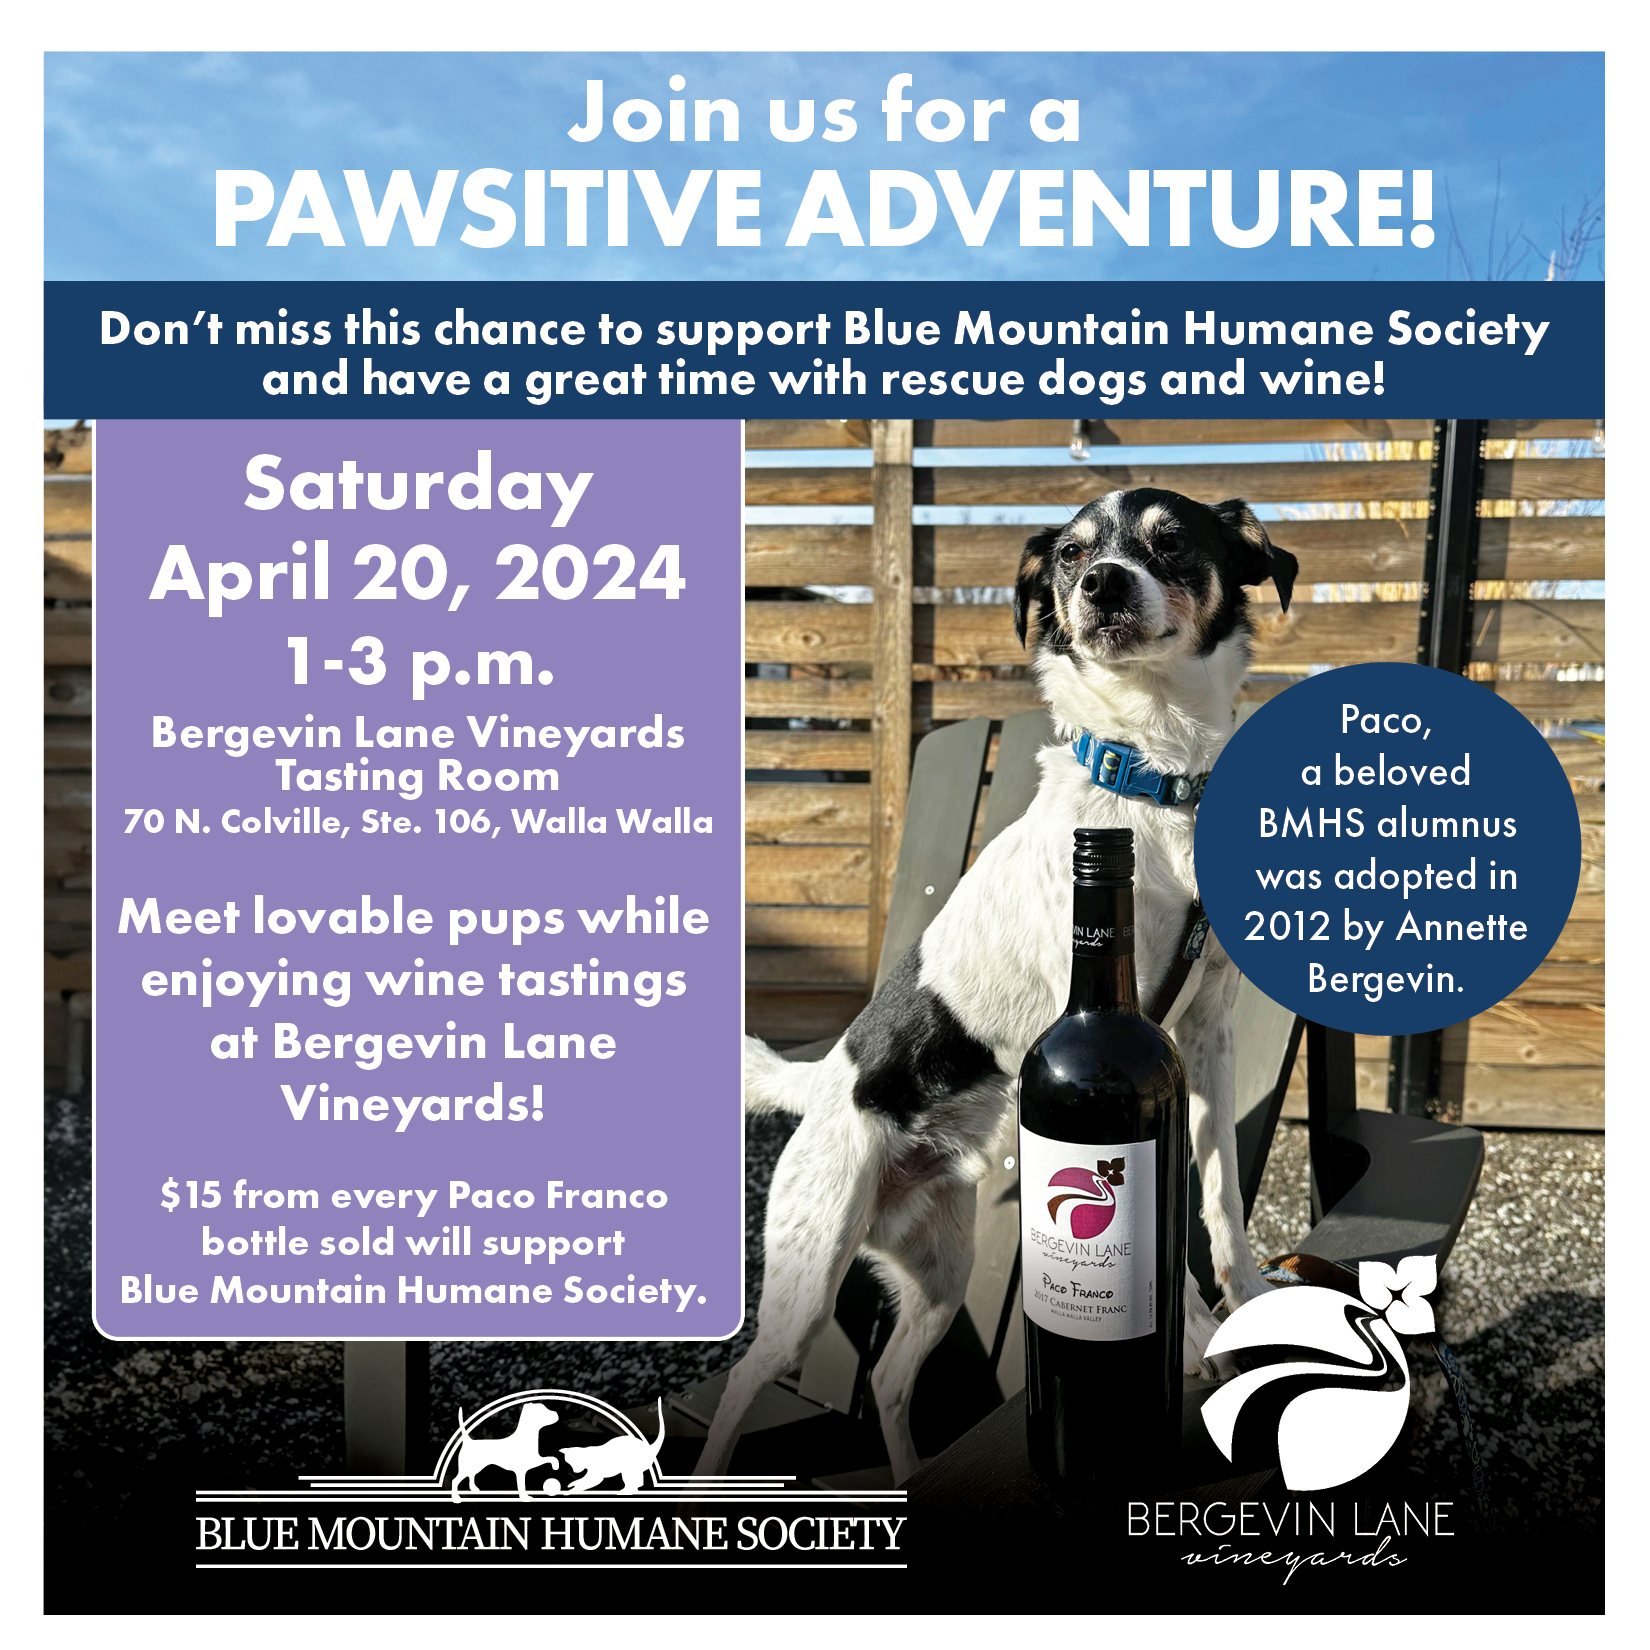 Join us tomorrow, April 20, from 1-3 p.m. at Bergevin Lane Vineyards for a BMHS Pawsitive Adventures event! $15 from every Paco Franco bottle sold will support BMHS. Meet adoptable dogs, enjoy wine tastings, and learn about adoption. Don't miss this 